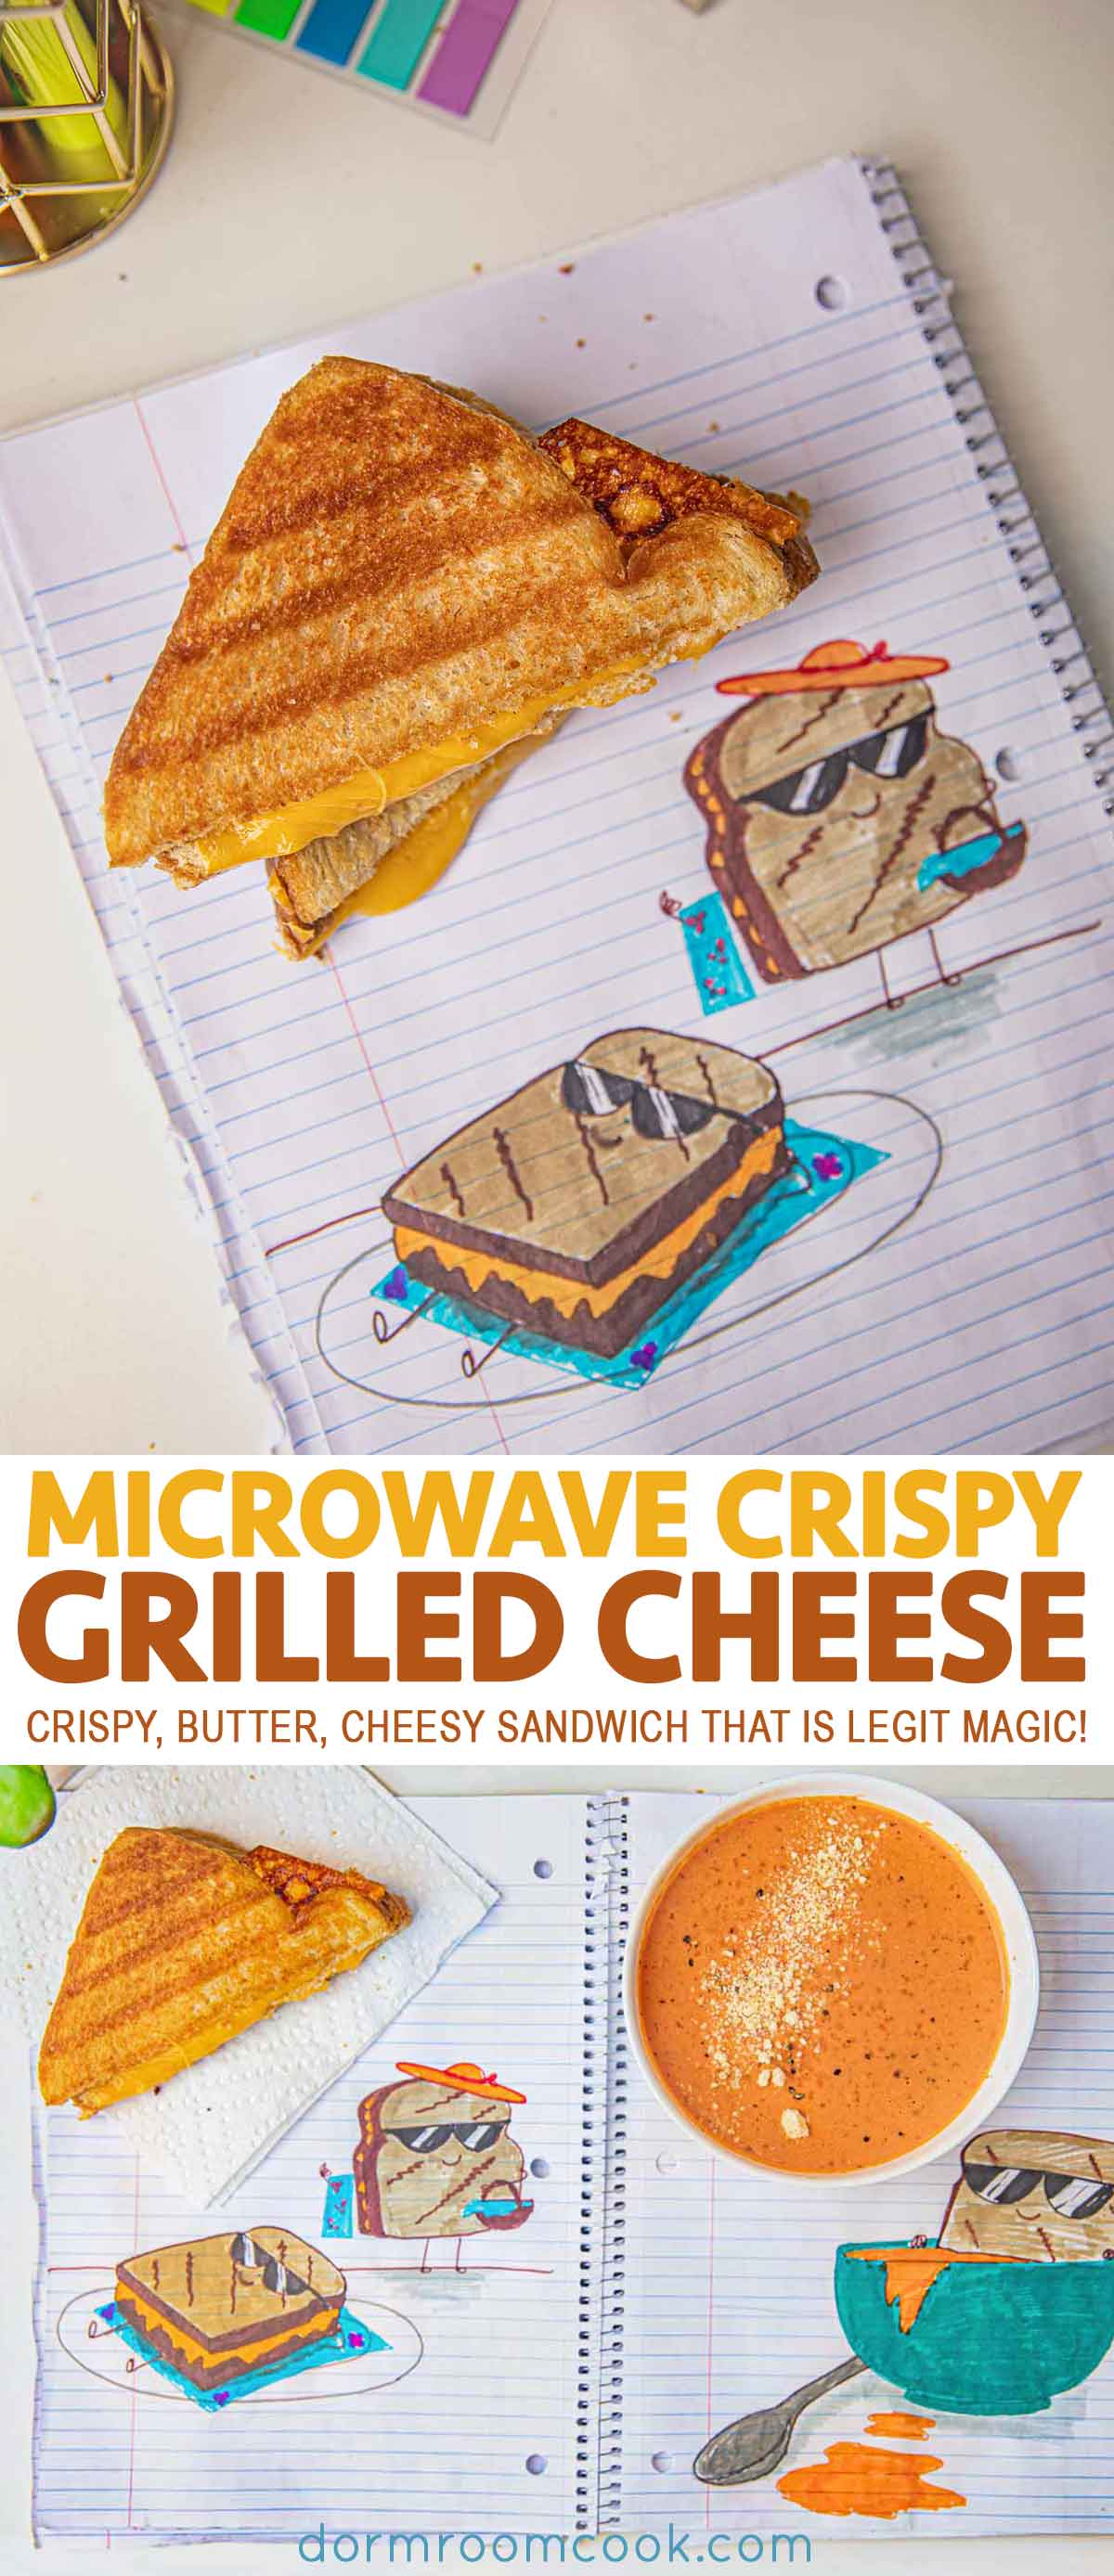 Microwave Crispy Grilled Cheese Sandwich